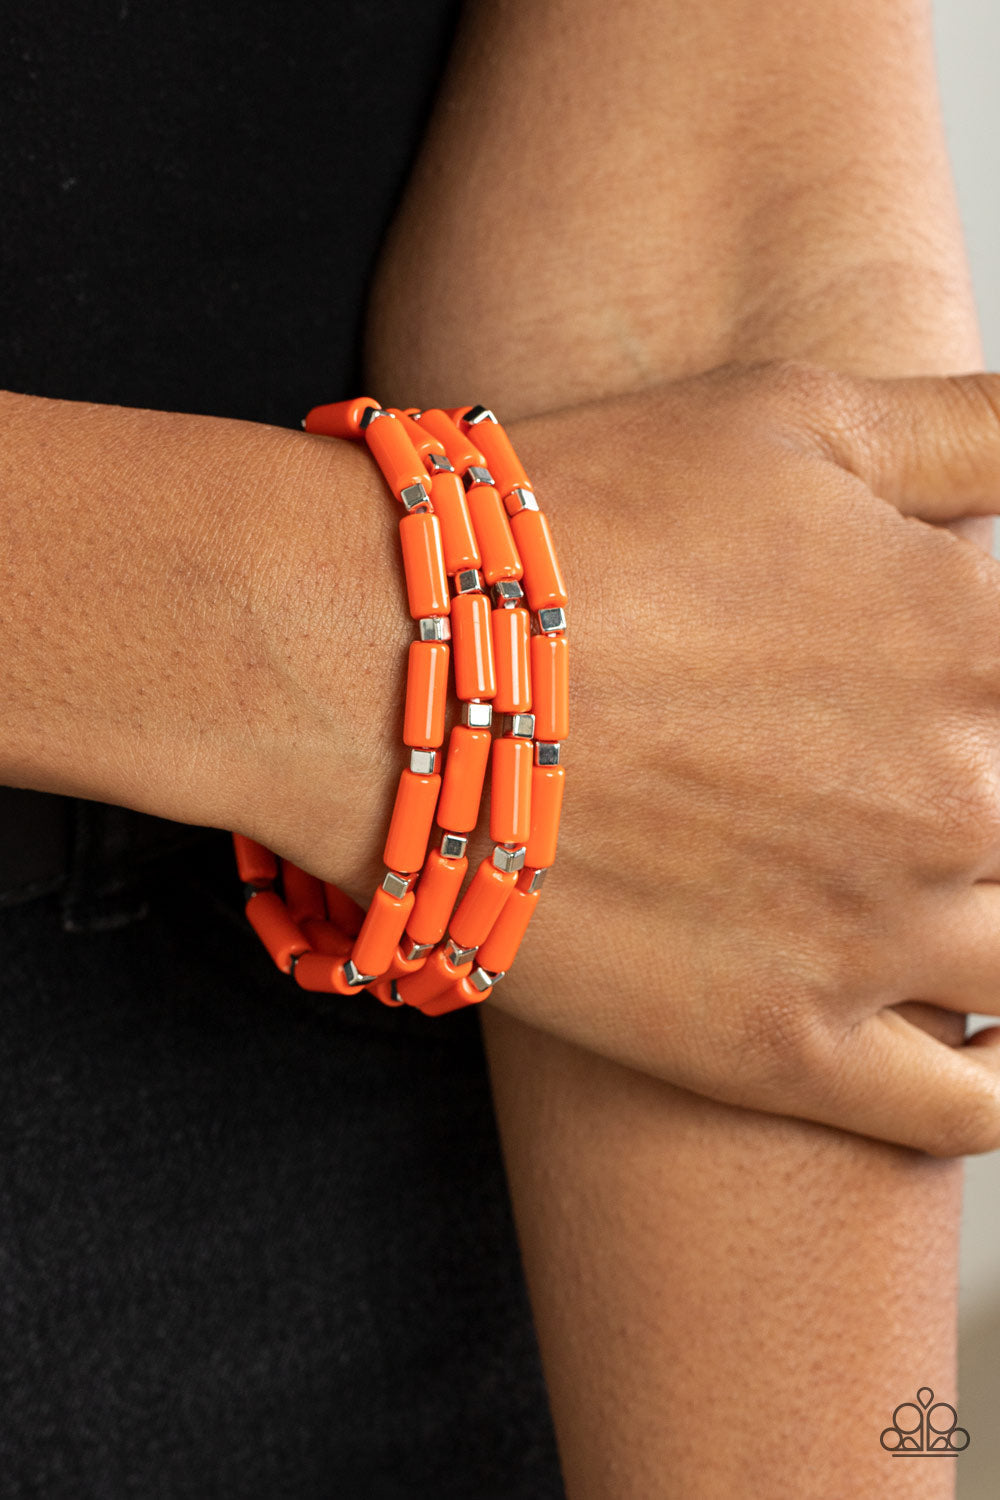 Radiantly Retro - Orange - Silver Stretchy Bracelets - Paparazzi Accessories - Bejeweled Accessories By Kristie - Trendy fashion jewelry for everyone - A playful collection of dainty silver cube beads and cylindrical orange beads along stretchy bands, creating colorful layers around the wrist. Sold as one set of four bracelets.